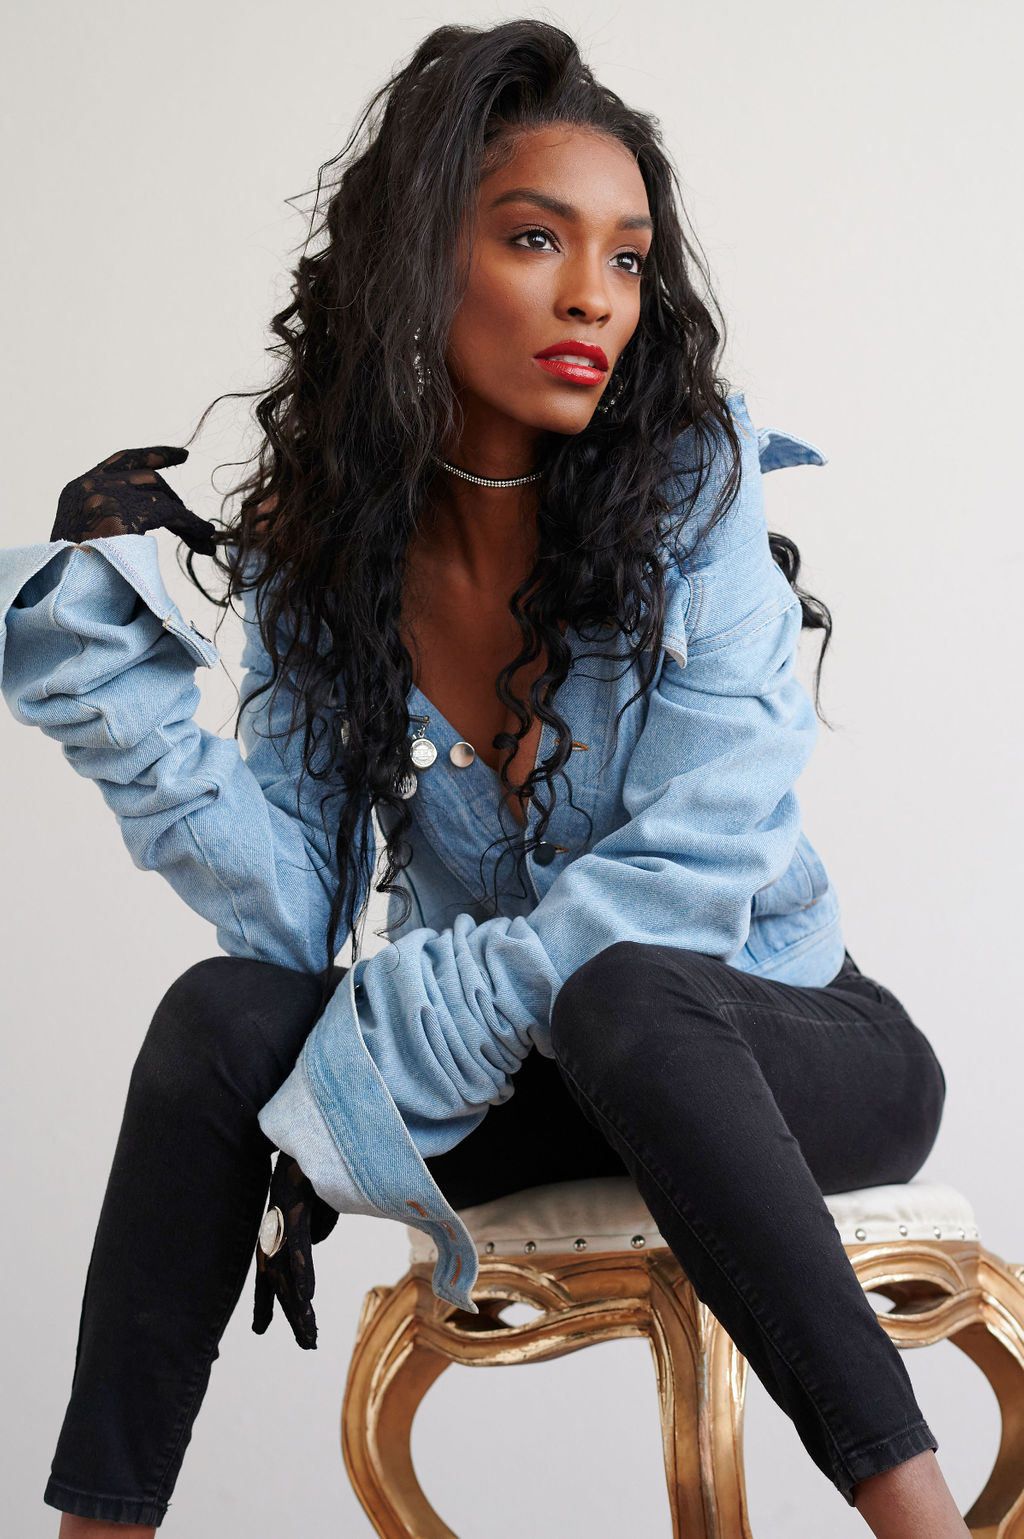 Annju'lia Smalls In Y/Project-styled by melissa-lcm-sheldon botler photography-denim jacket-elongated sleeves-high fashion